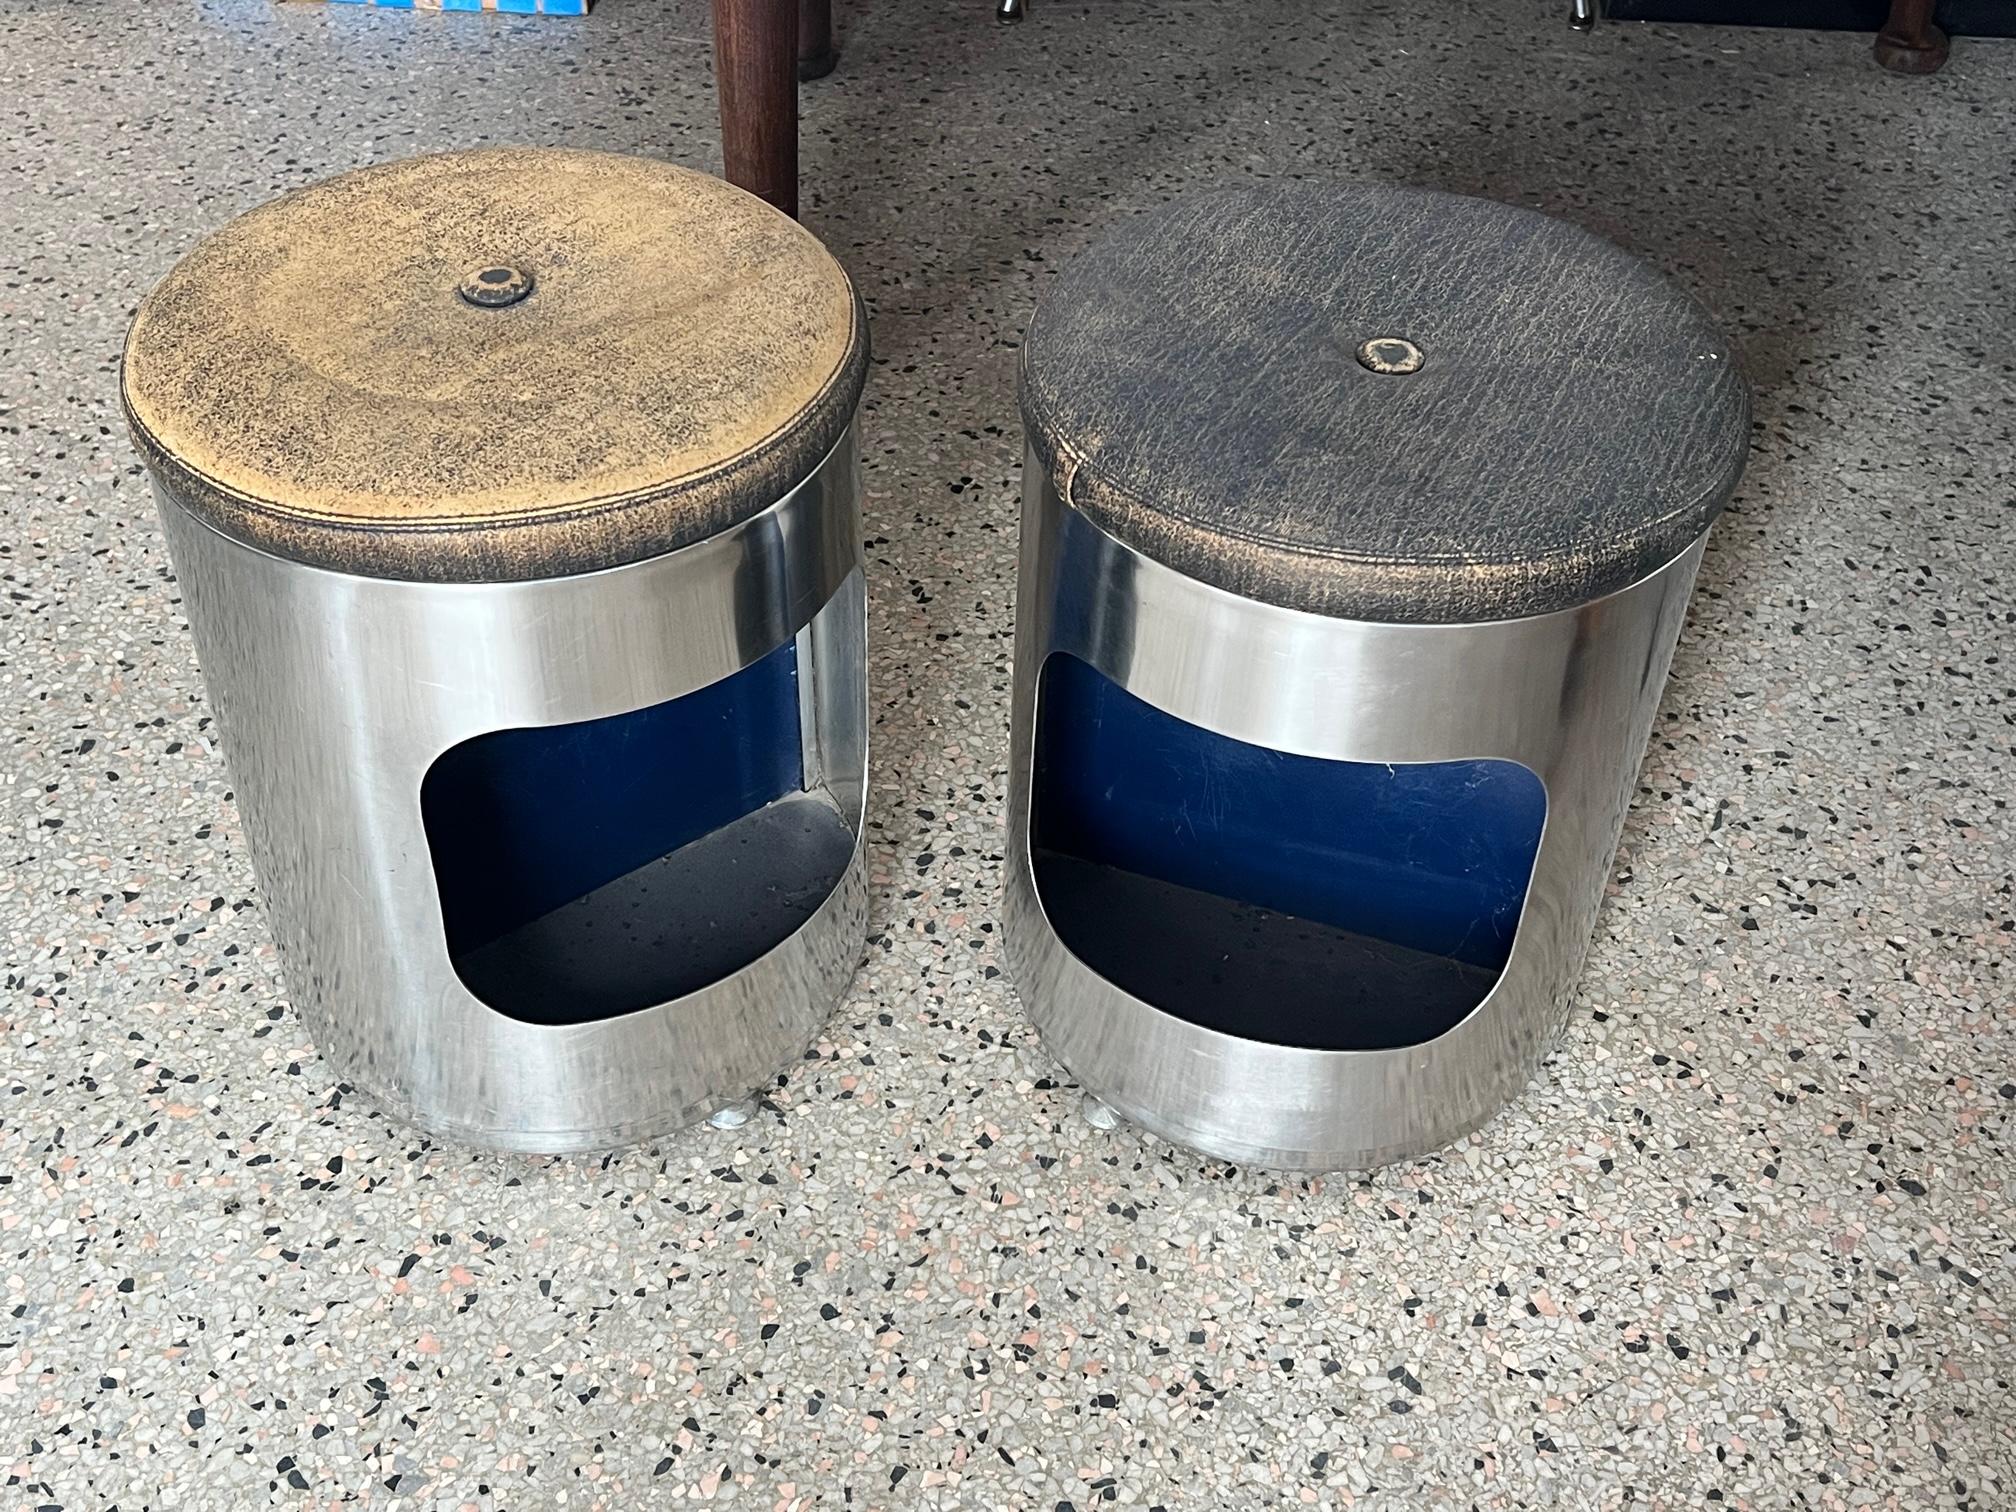 Pair of Italian Brushed Steel and Leather Upholstered Stools 1970's For Sale 4